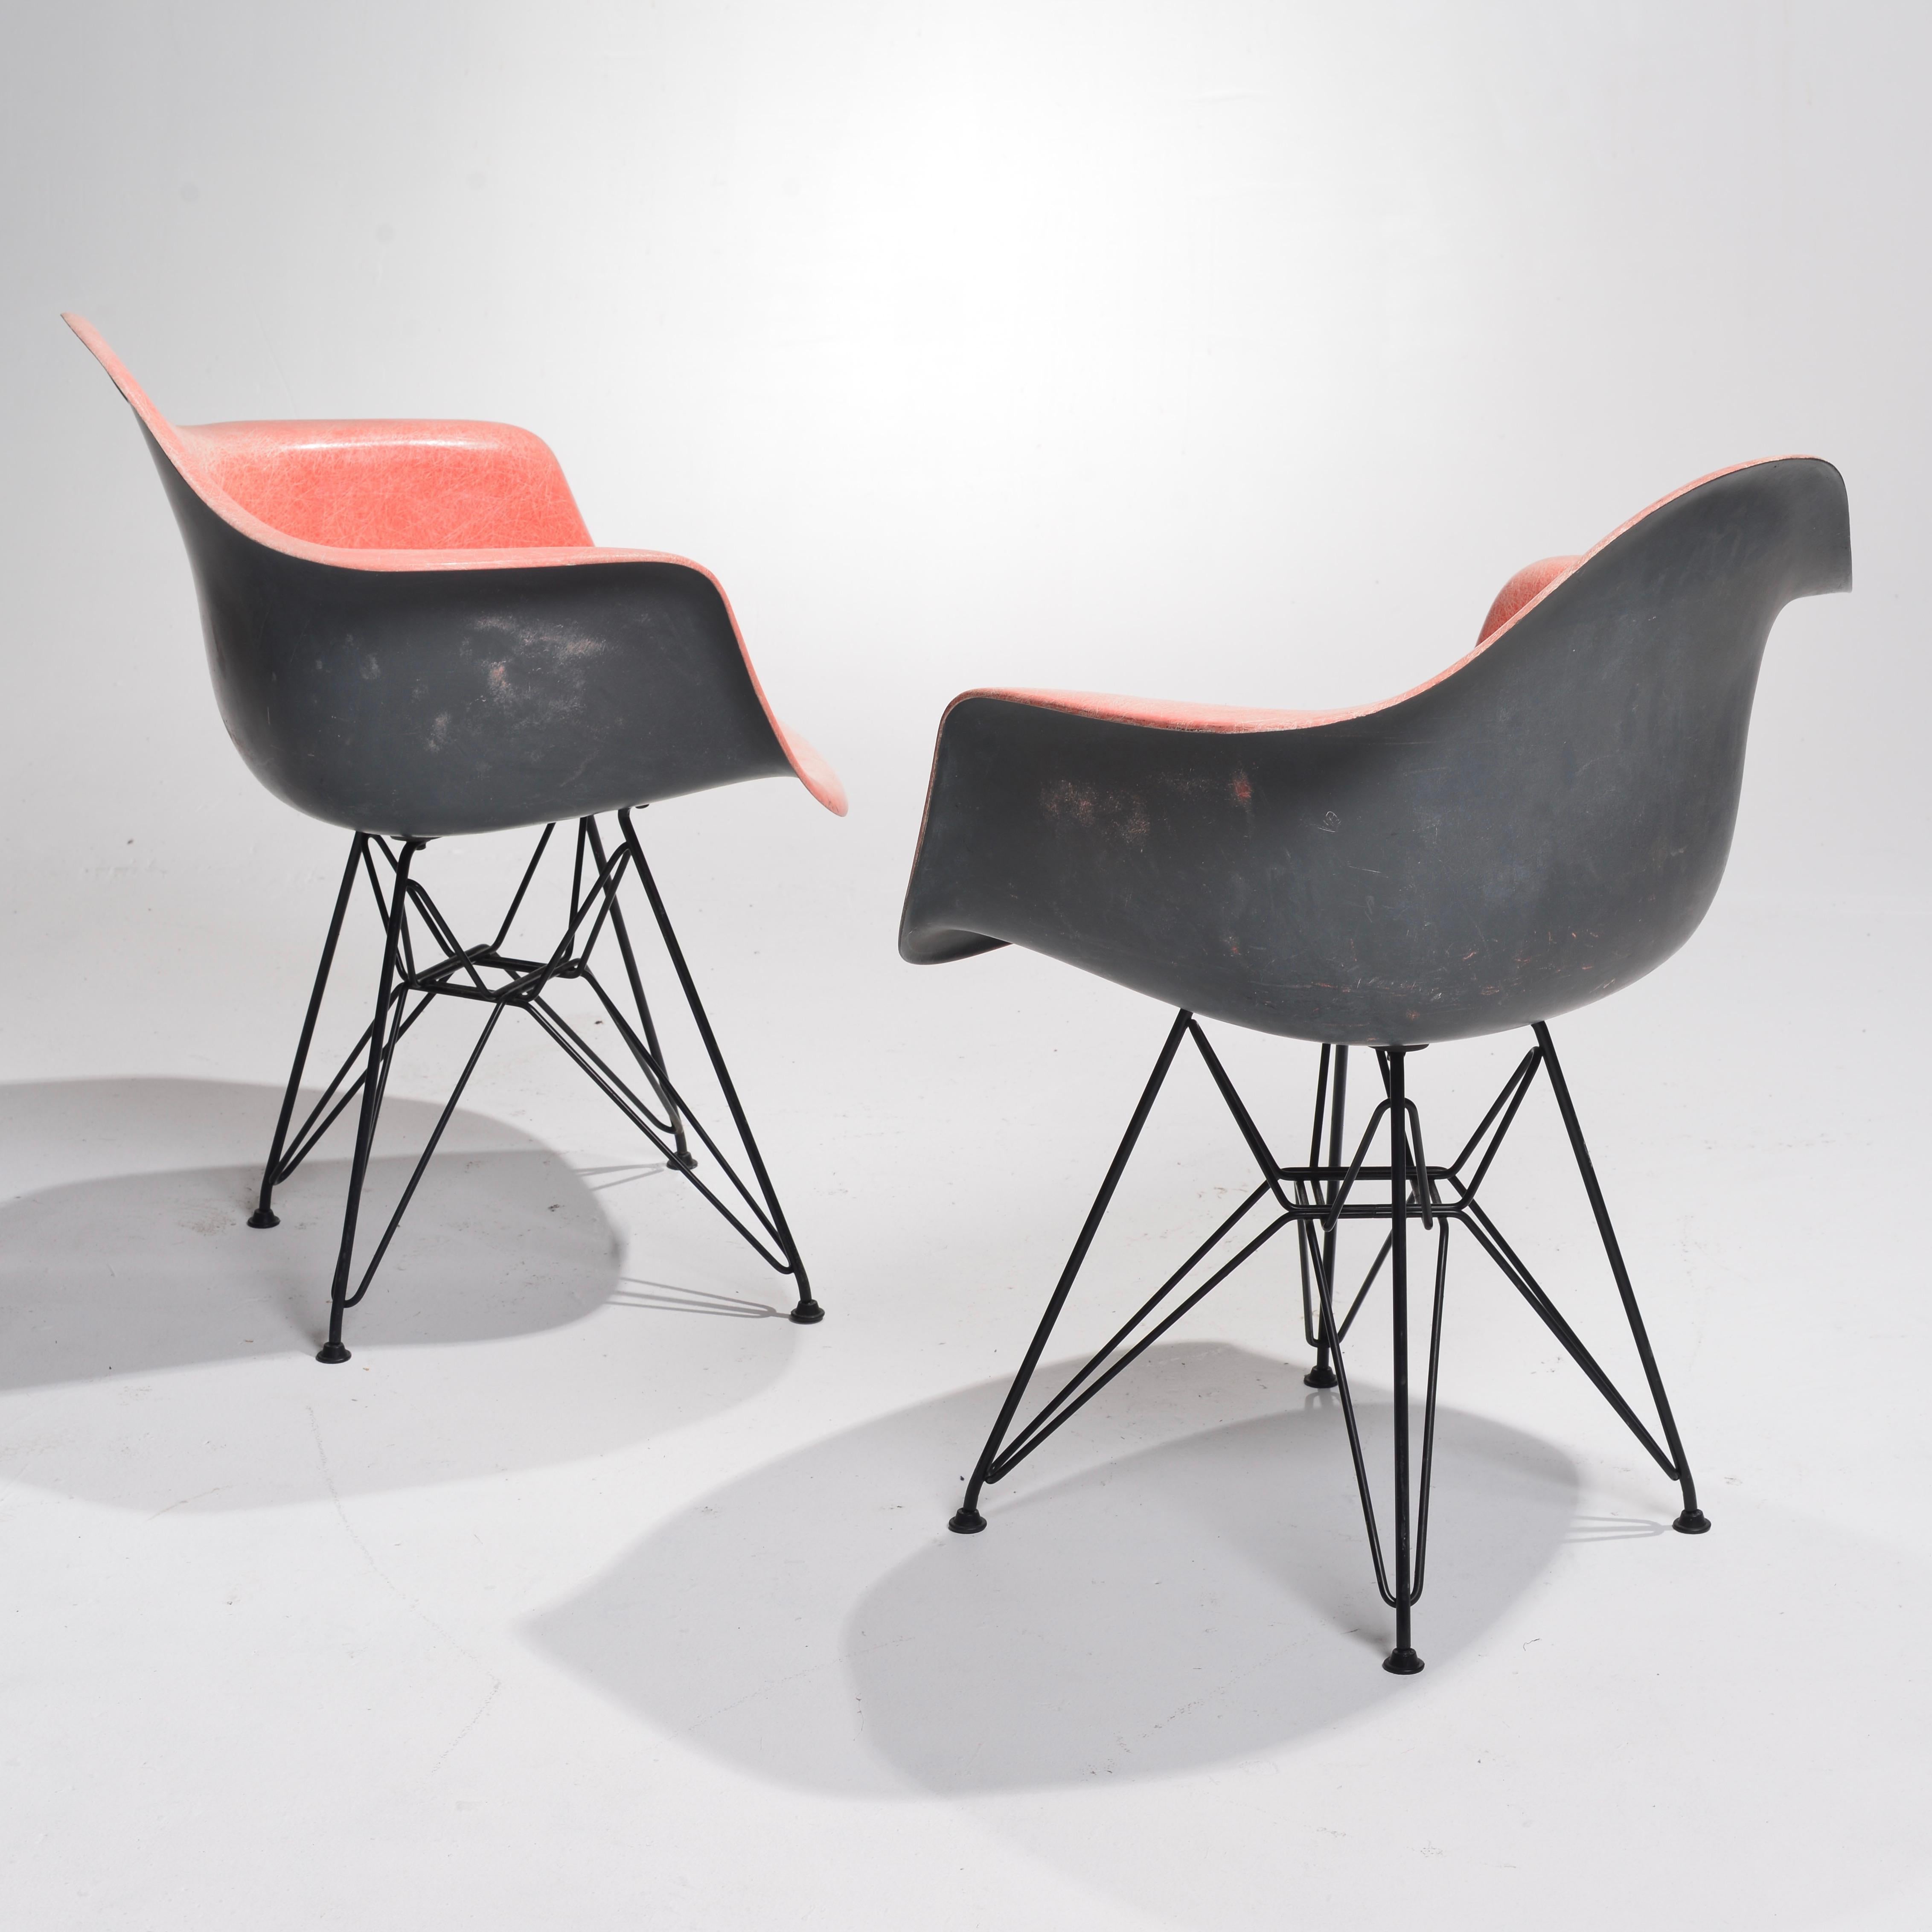 Molded Zenith Charles Eames DAR Fiberglass Shell Chairs For Sale